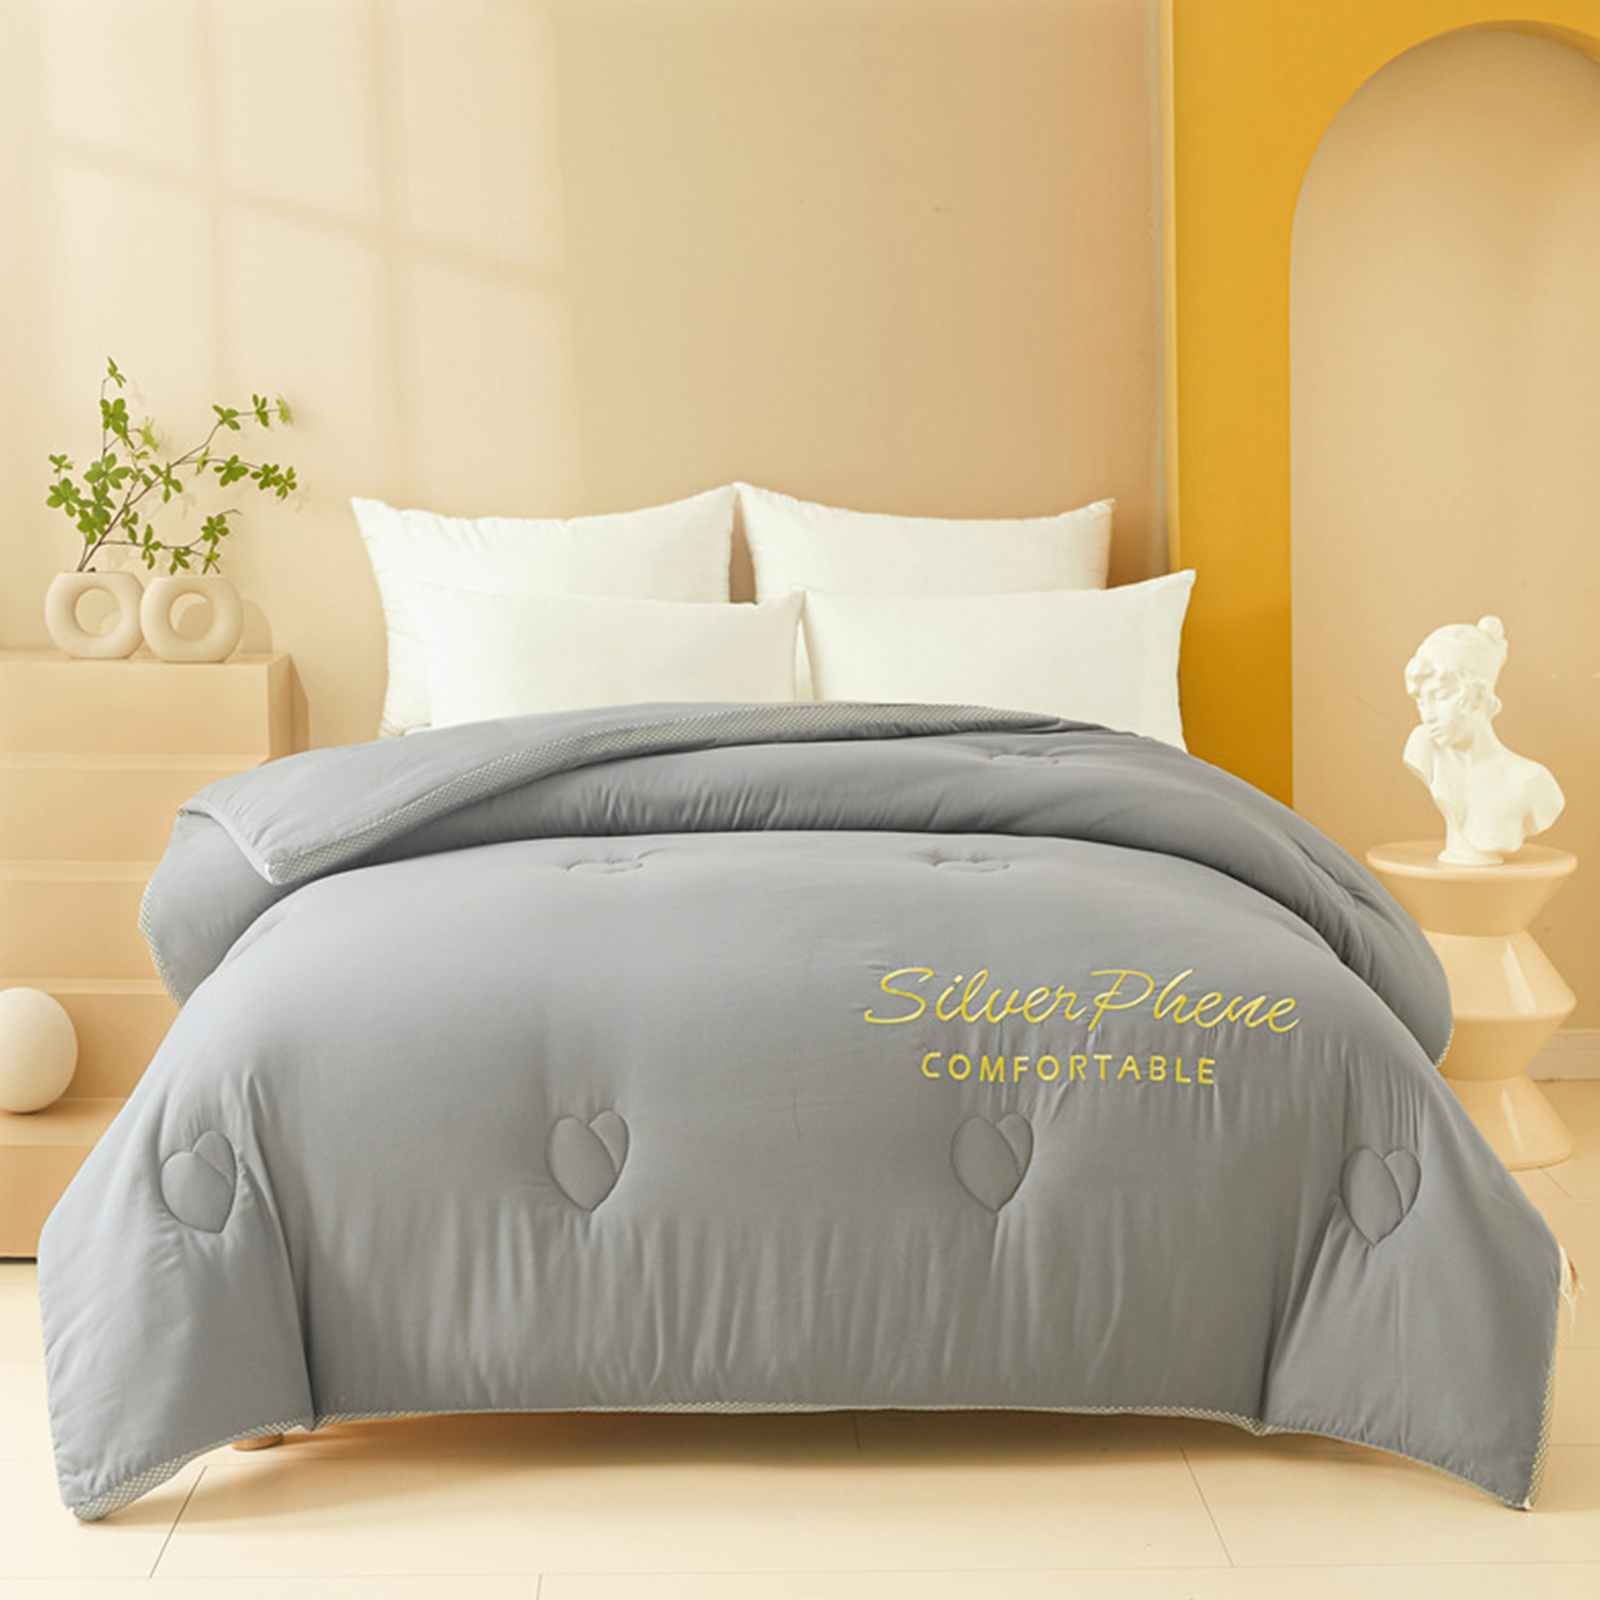 Four-Level General-Purpose Quilt with Quilt Cover is Suitable for 2m Beds (200*230CM),Grey